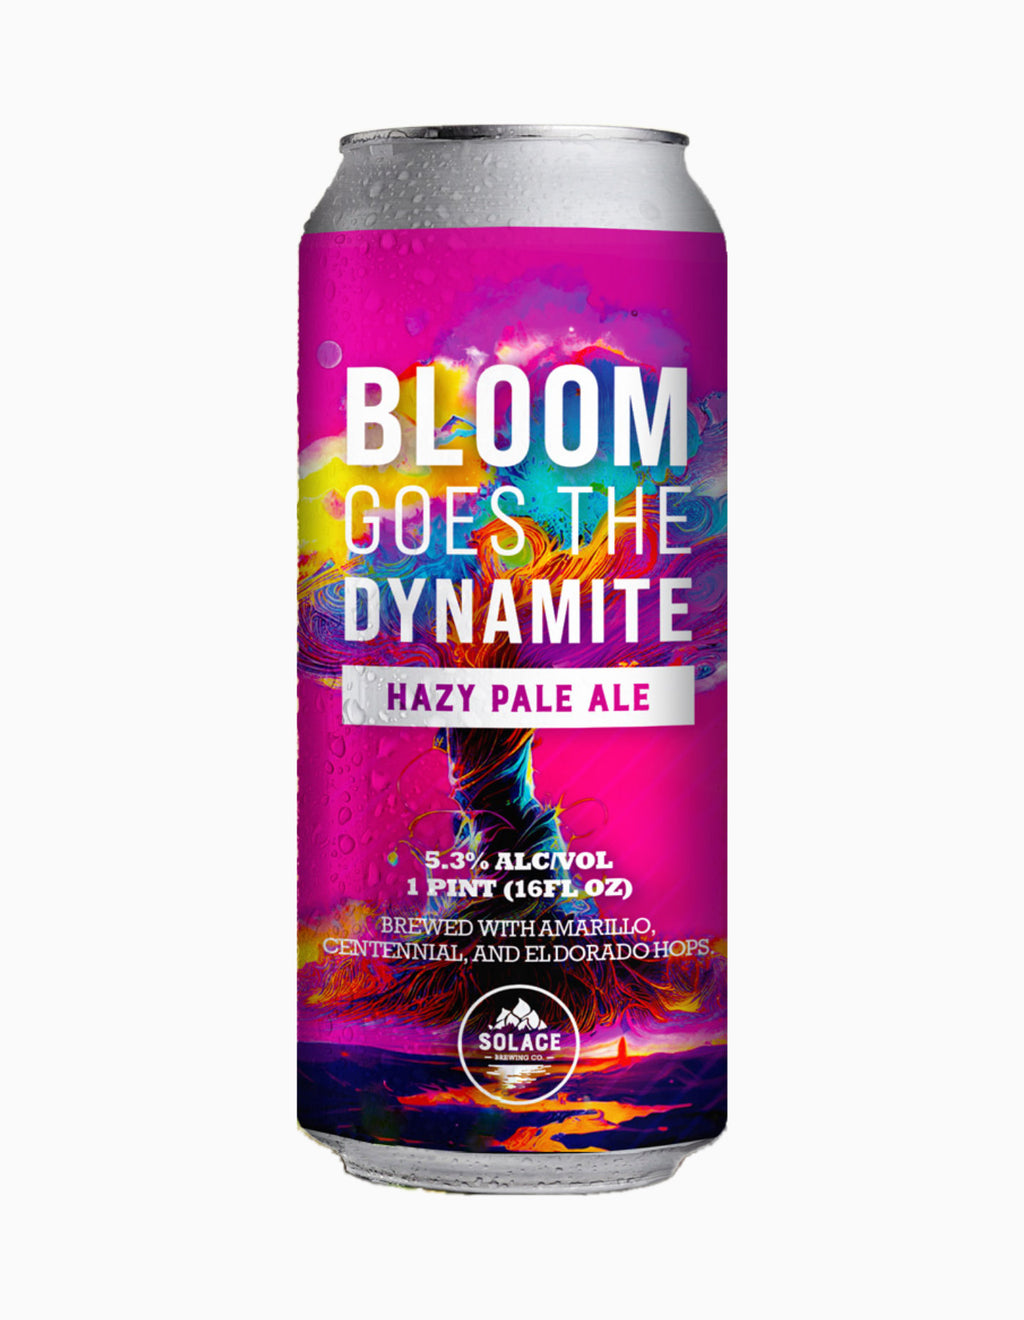 Bloom Goes the Dynamite